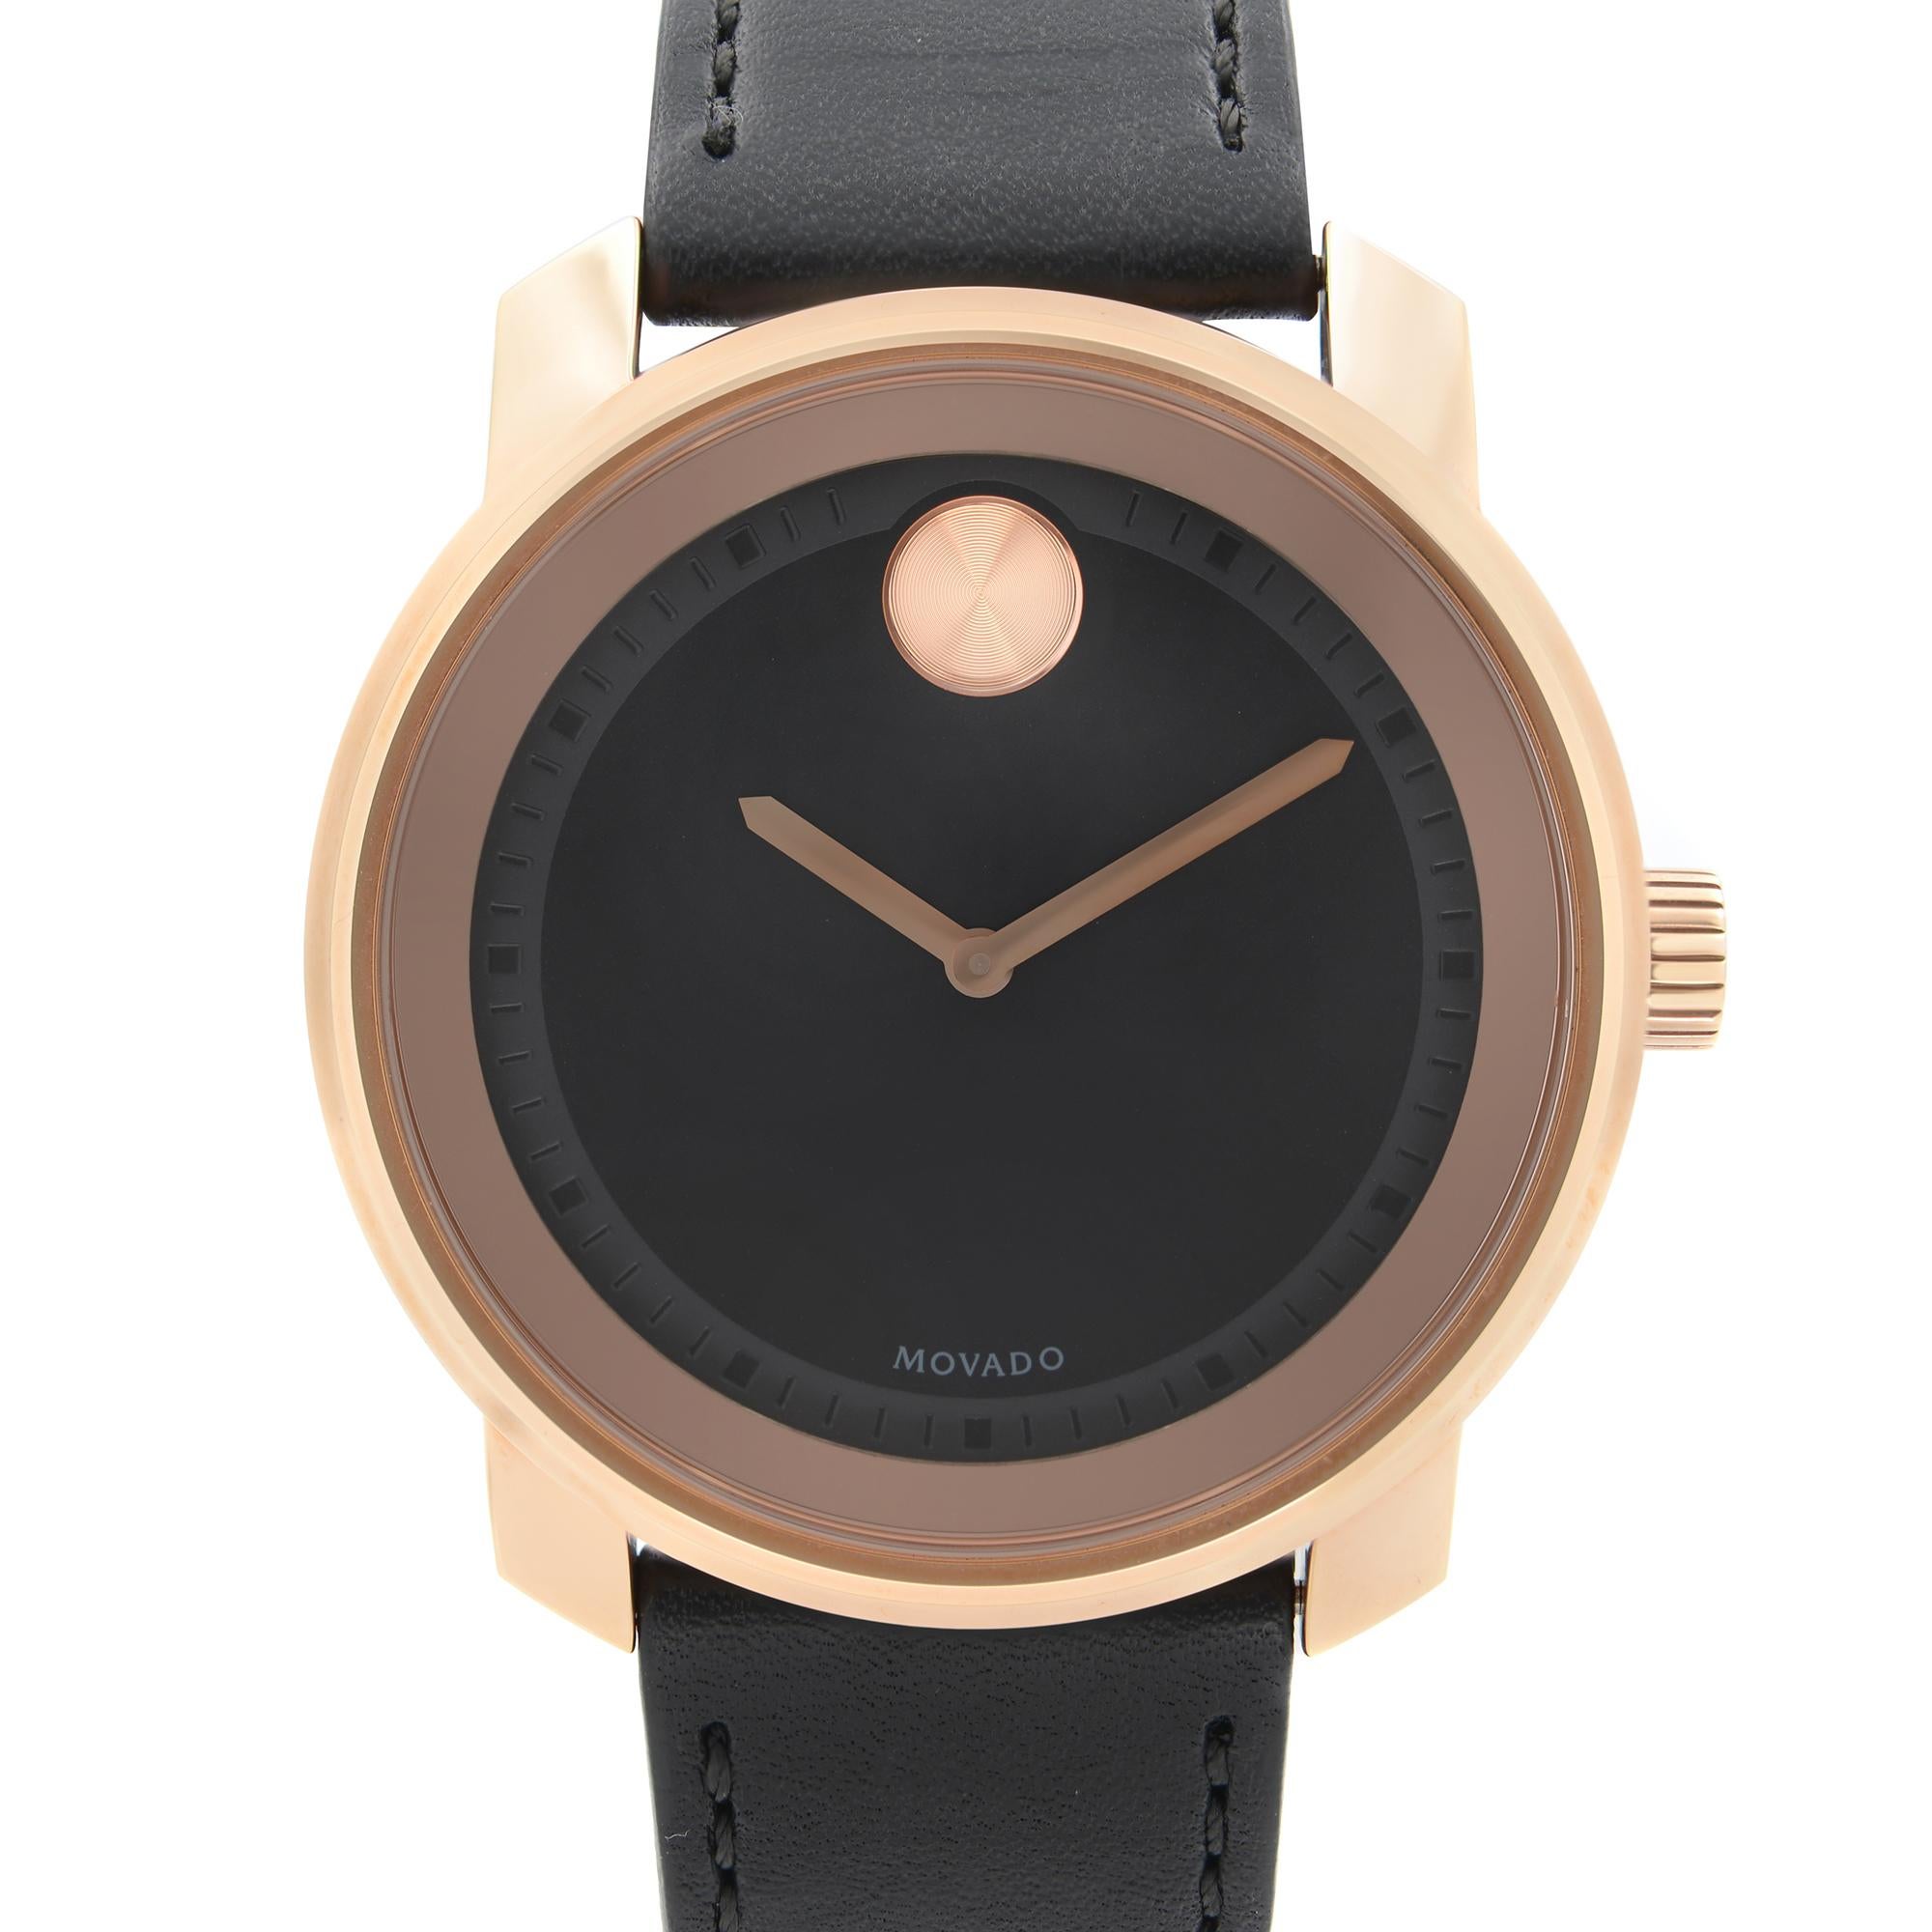 Display Model Movado Bold Black Dial Men's Watch 3600376. This watch was never worn or owned but may have a few hairline Blemishes on the Case visible Under Closed Inspection Due to Handling and storing. This Beautiful Timepiece Features: Rose